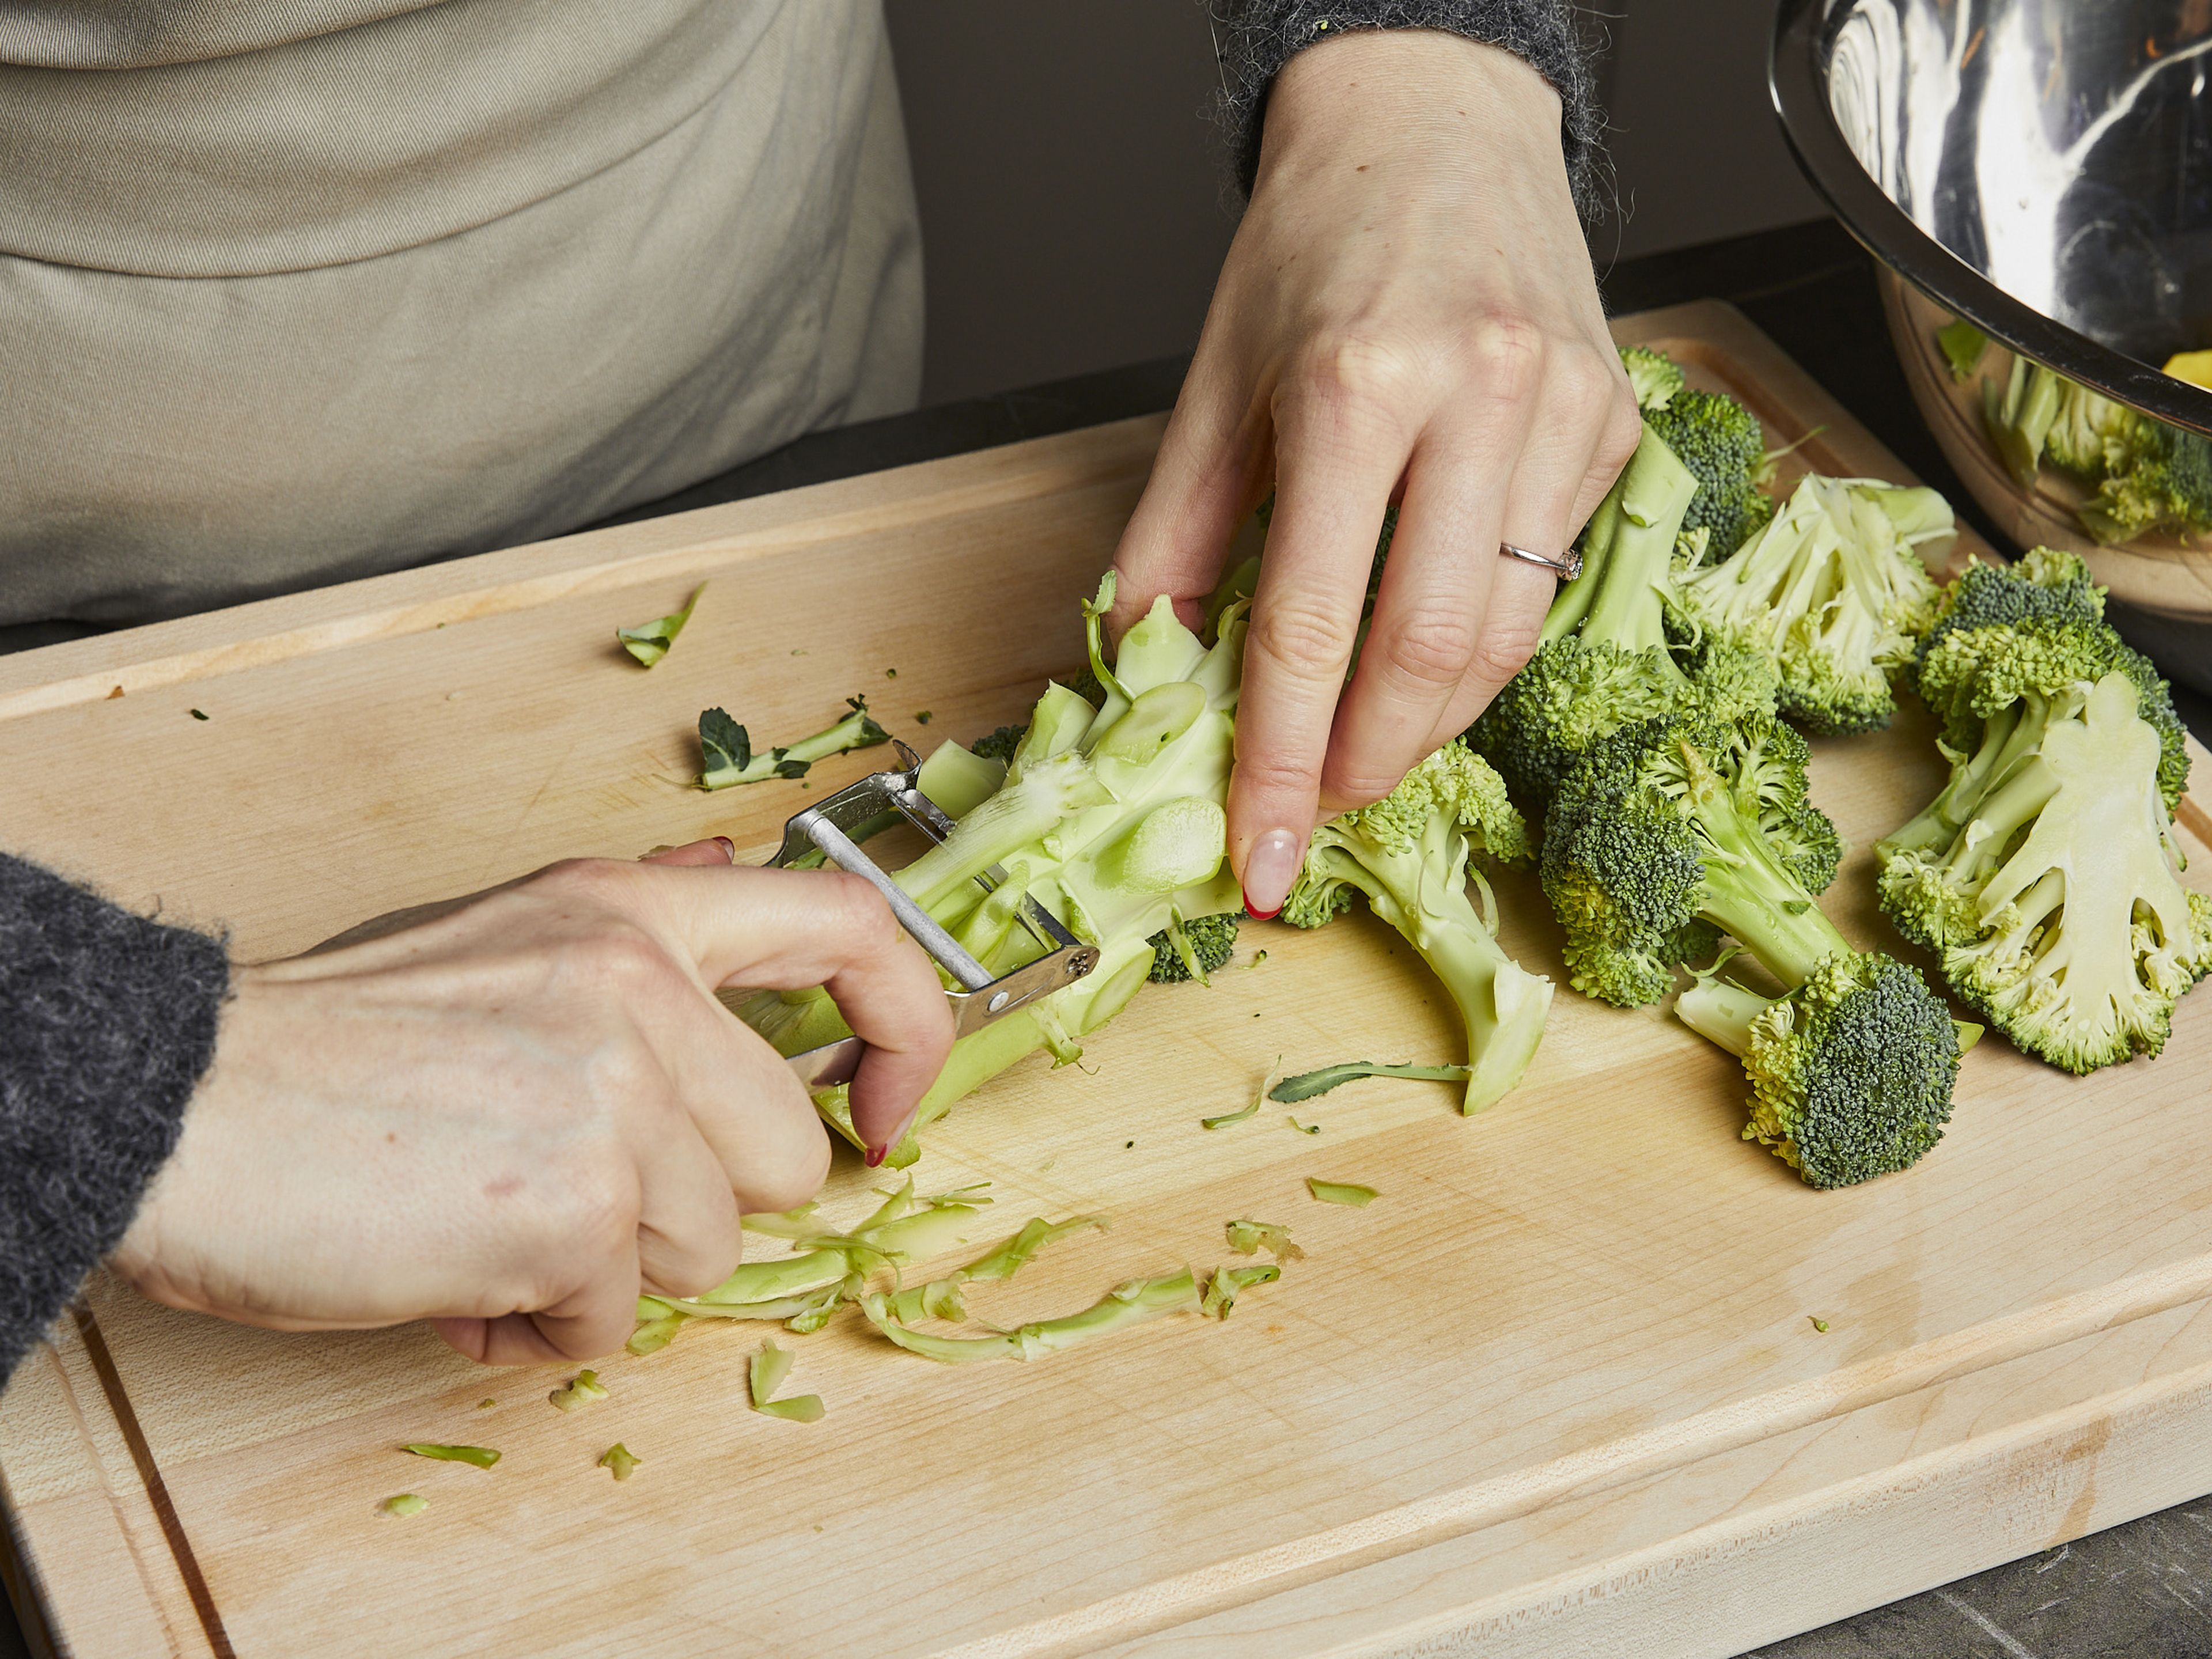 Peel and finely dice onion and ⅔ of the garlic. Cut broccoli into florets, then peel the stem and chop roughly. Put ¼ broccoli aside to garnish. Peel and dice the potatoes.